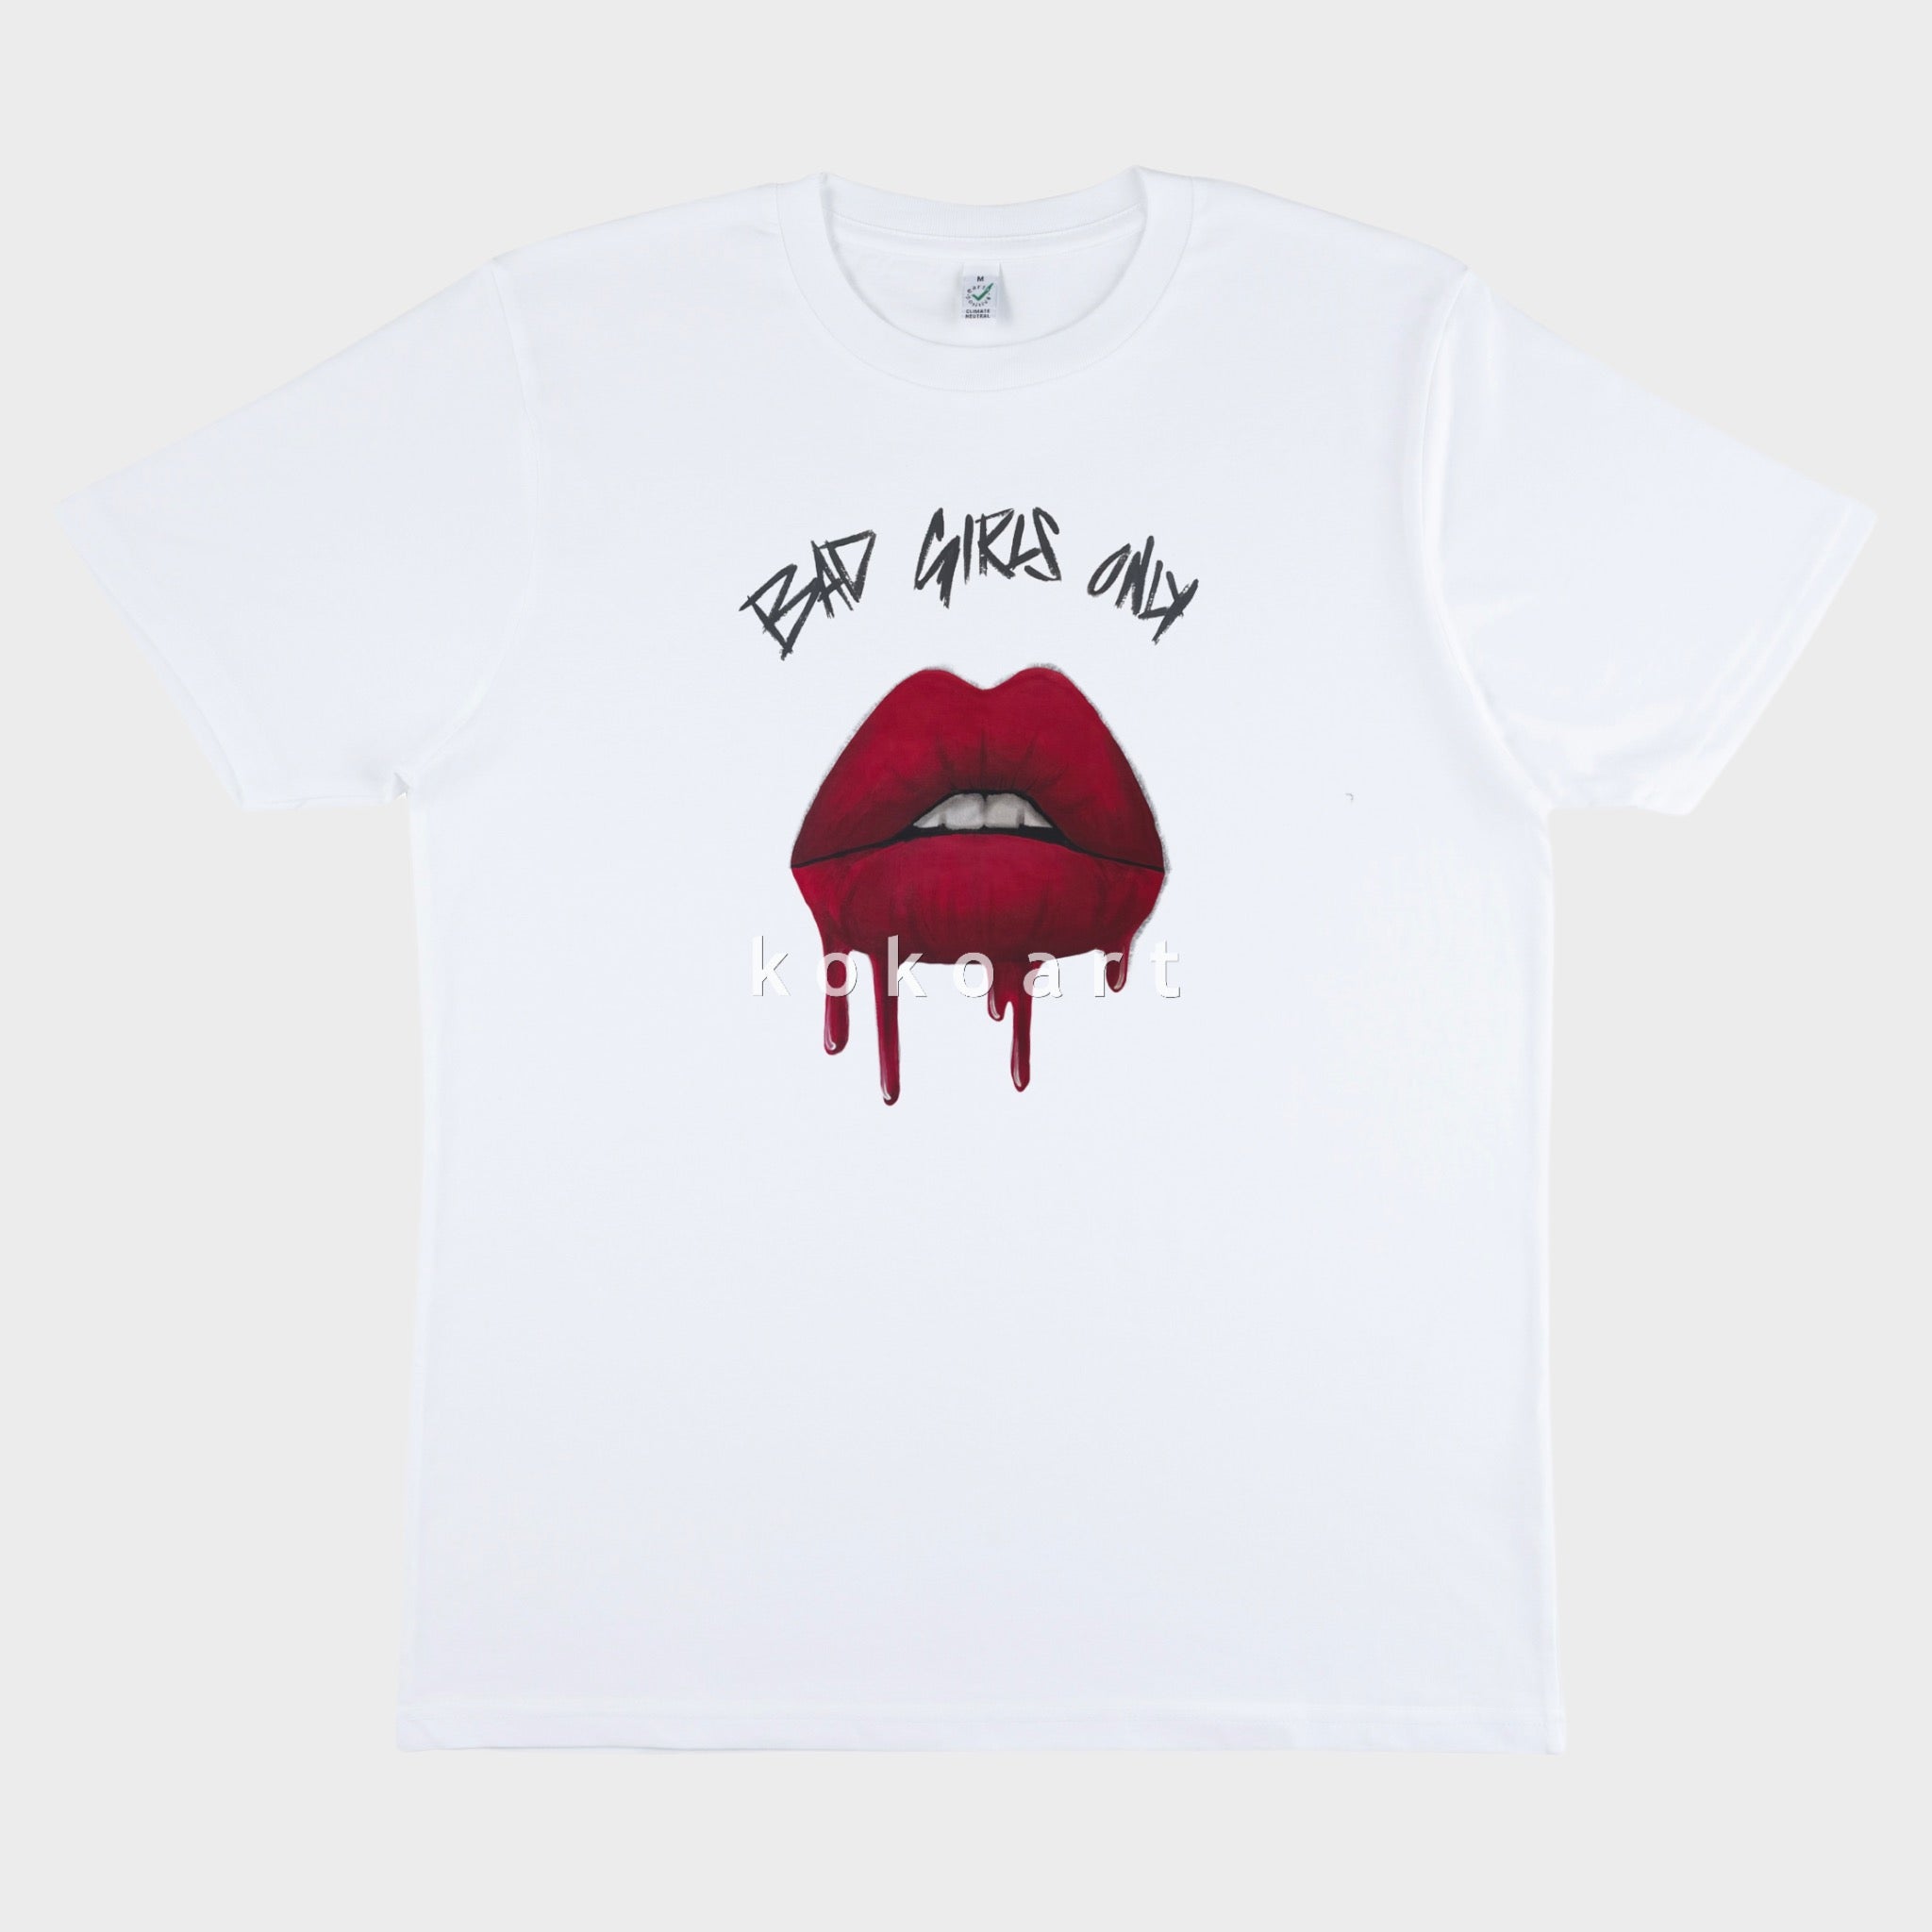 Bad Girls Only - Hand painted Organic Cotton Clothing